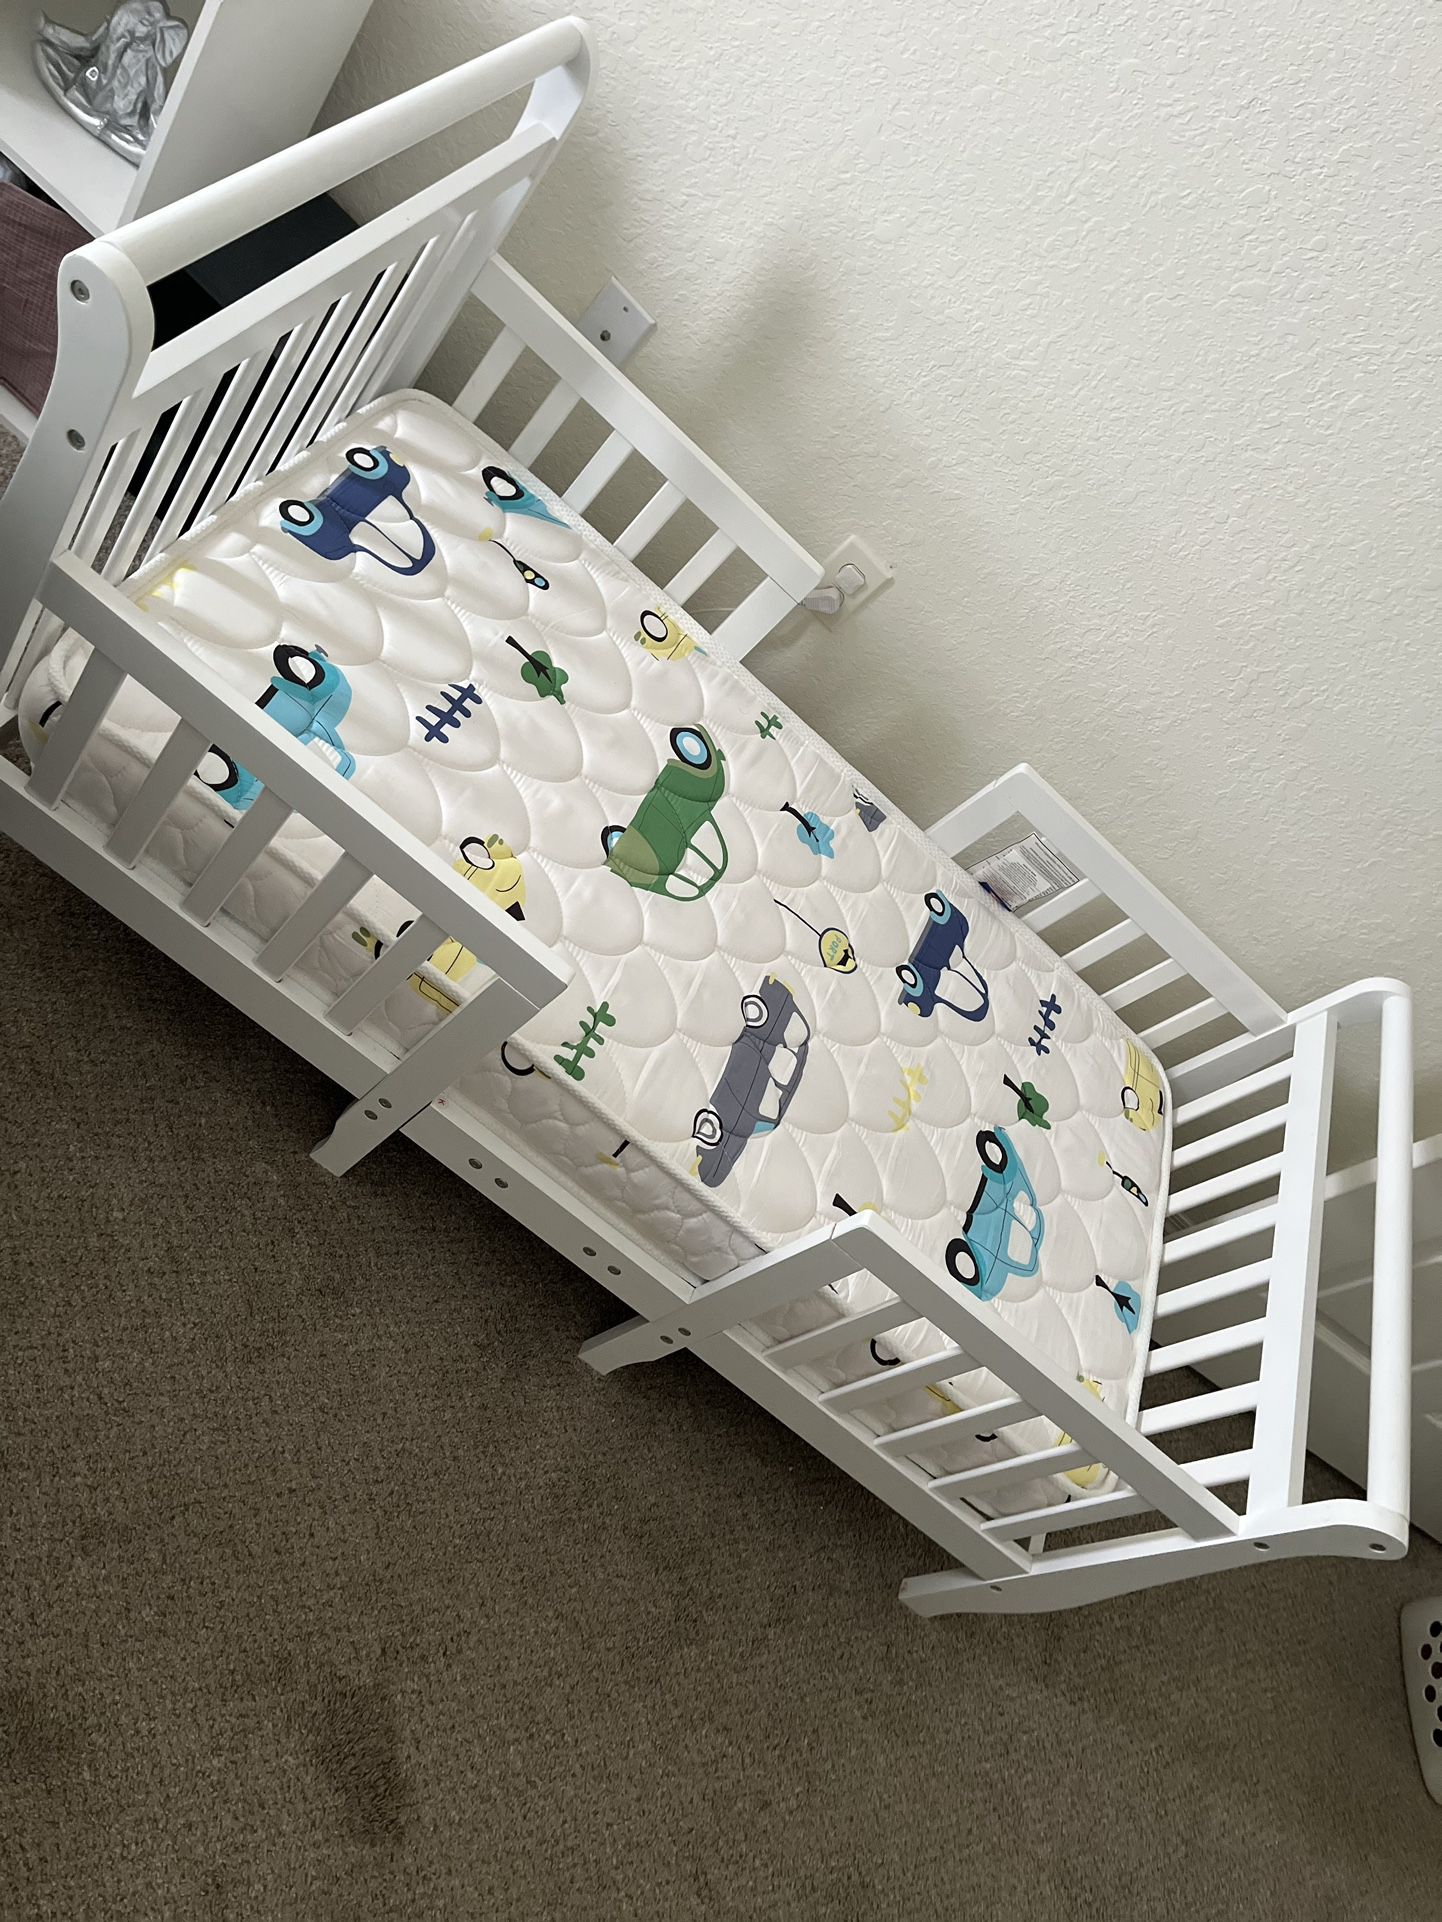 Toddler Bed and Mattress